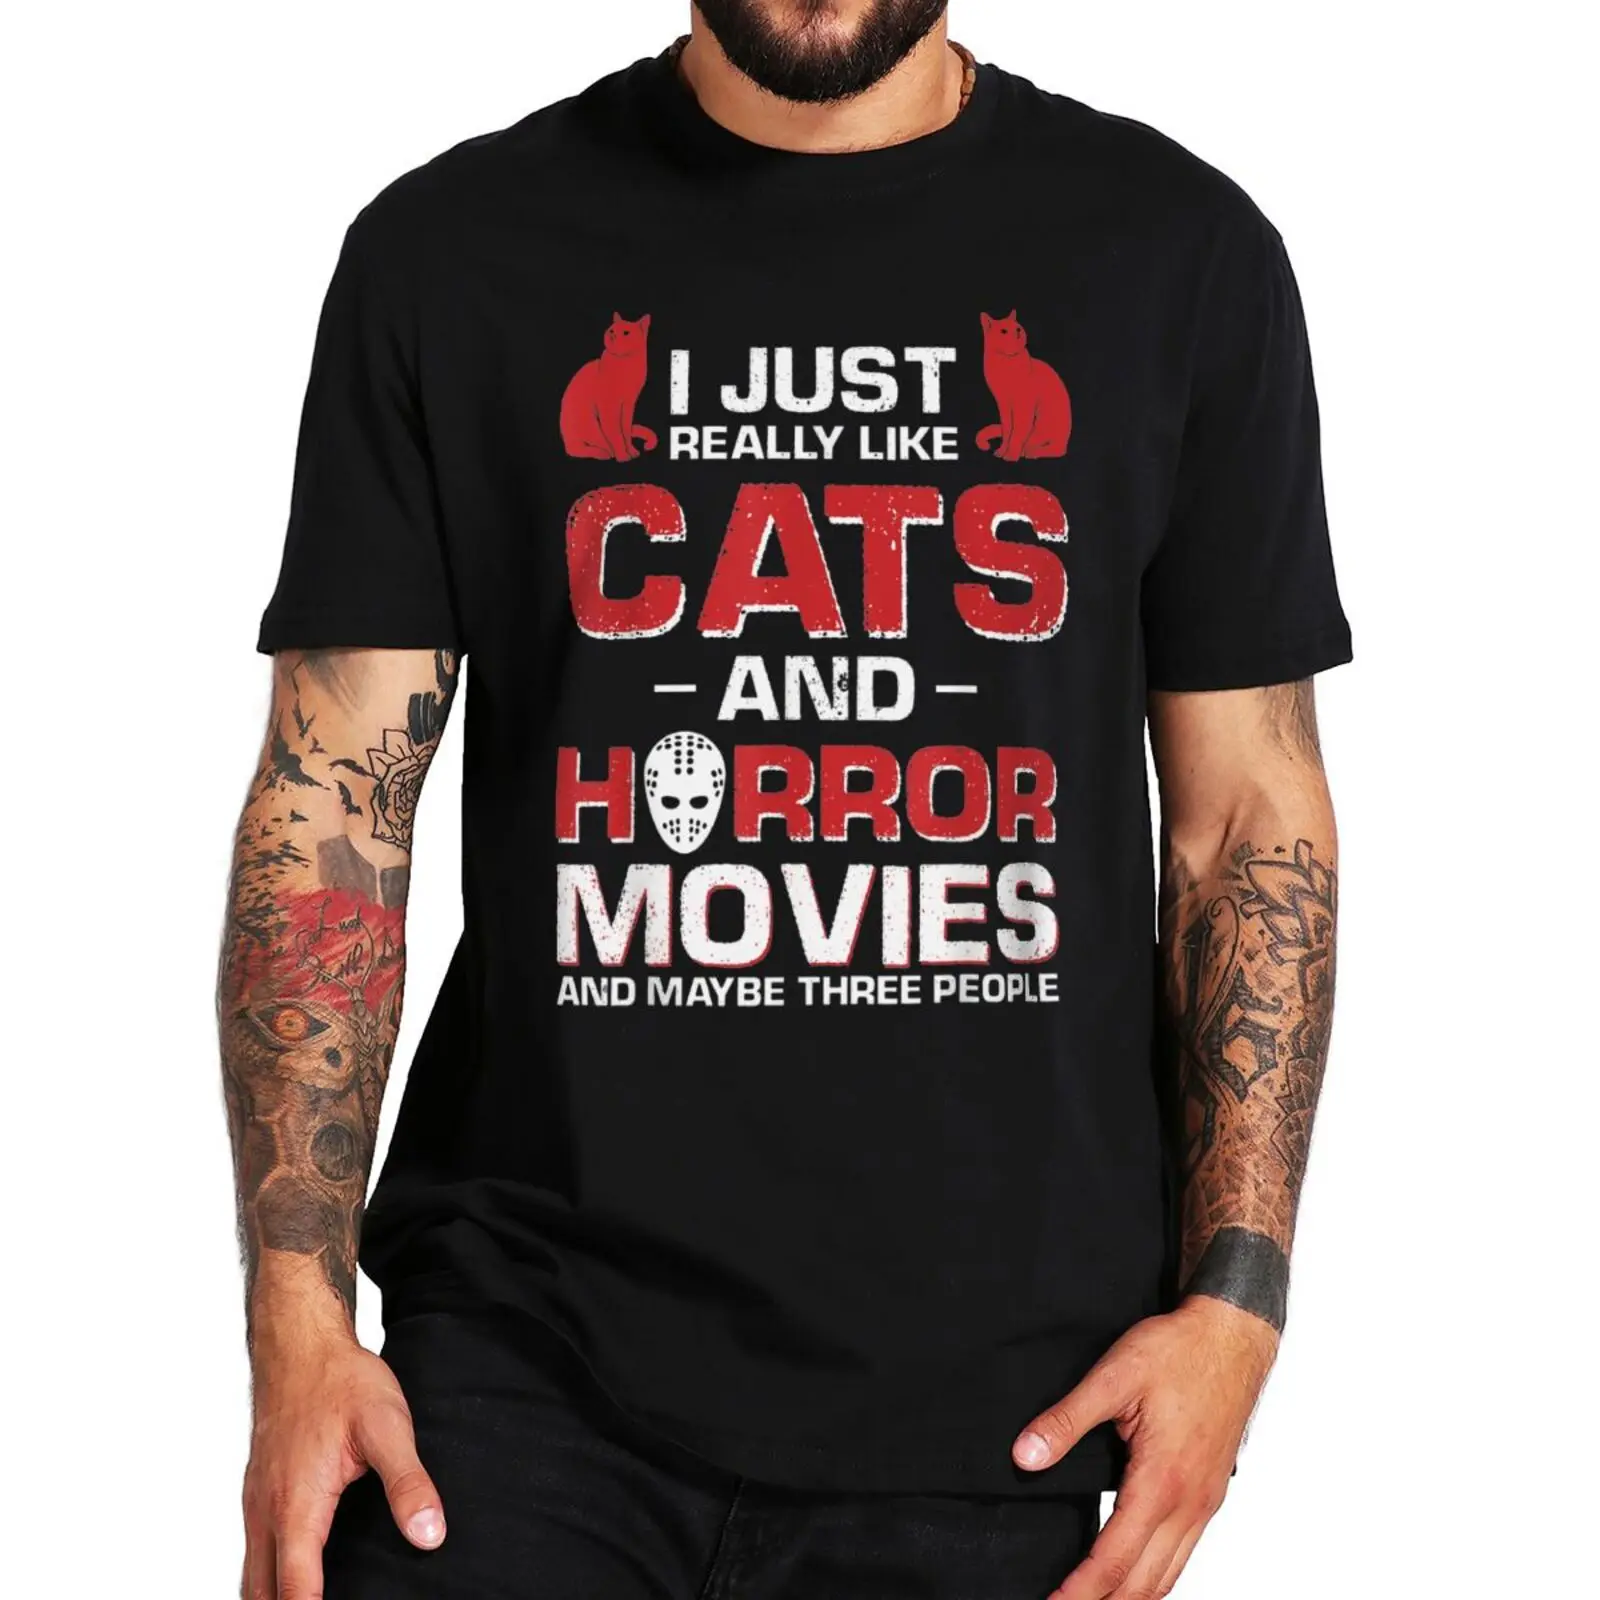 

I Just Really Like Cats And Horror Movies T Shirt Retro Funny Cat Film Fans Men Clothing Premium Summer 100% Cotton T-shirts